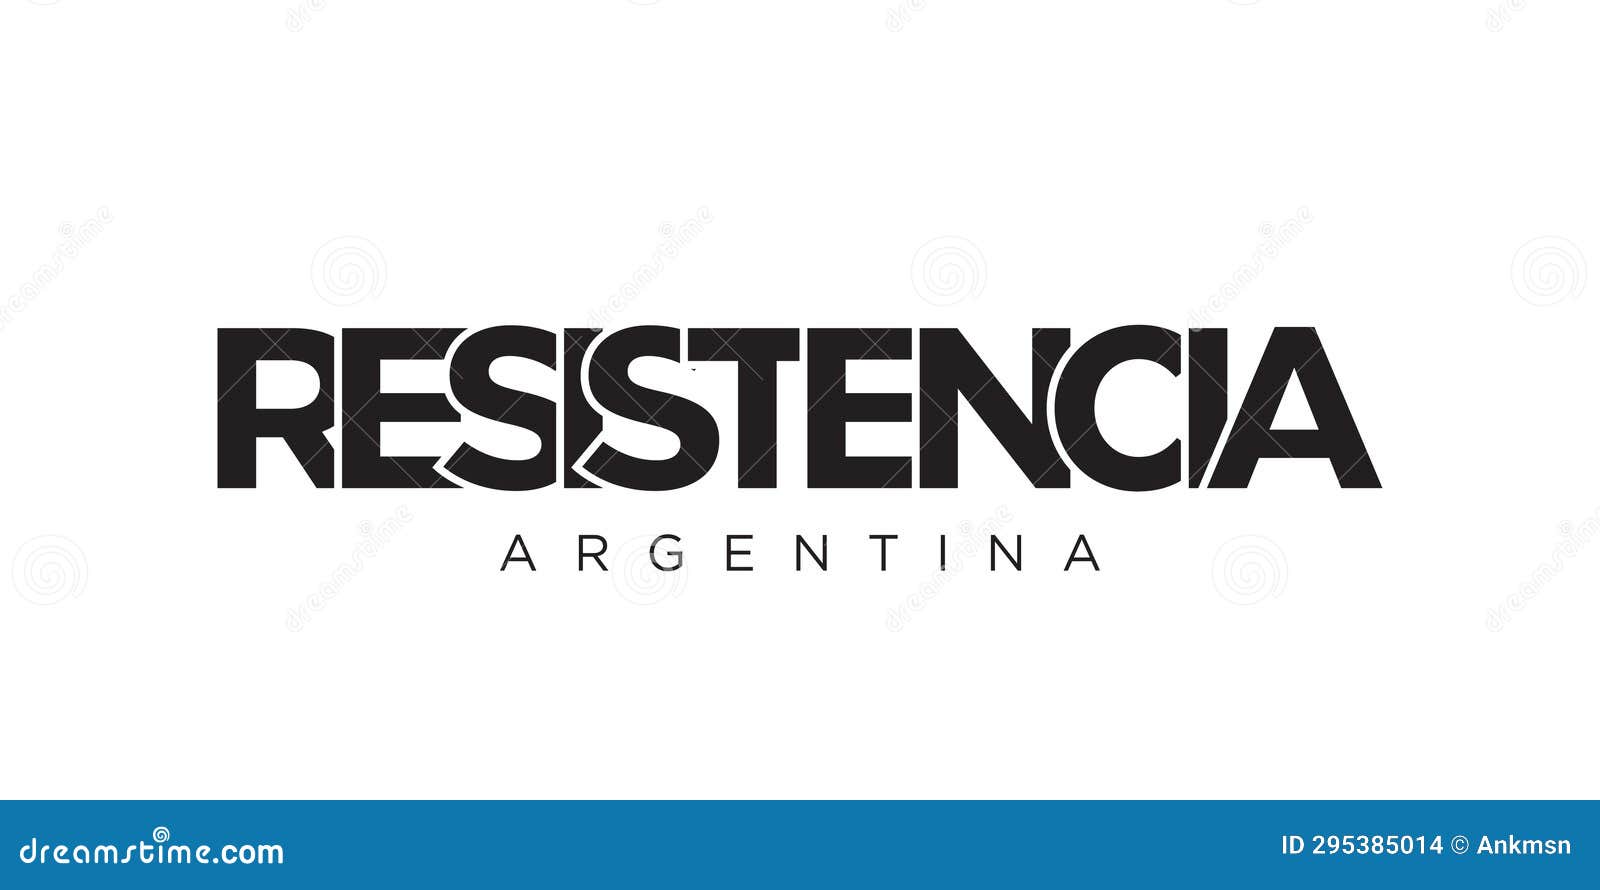 resistencia in the argentina emblem. the  features a geometric style,   with bold typography in a modern